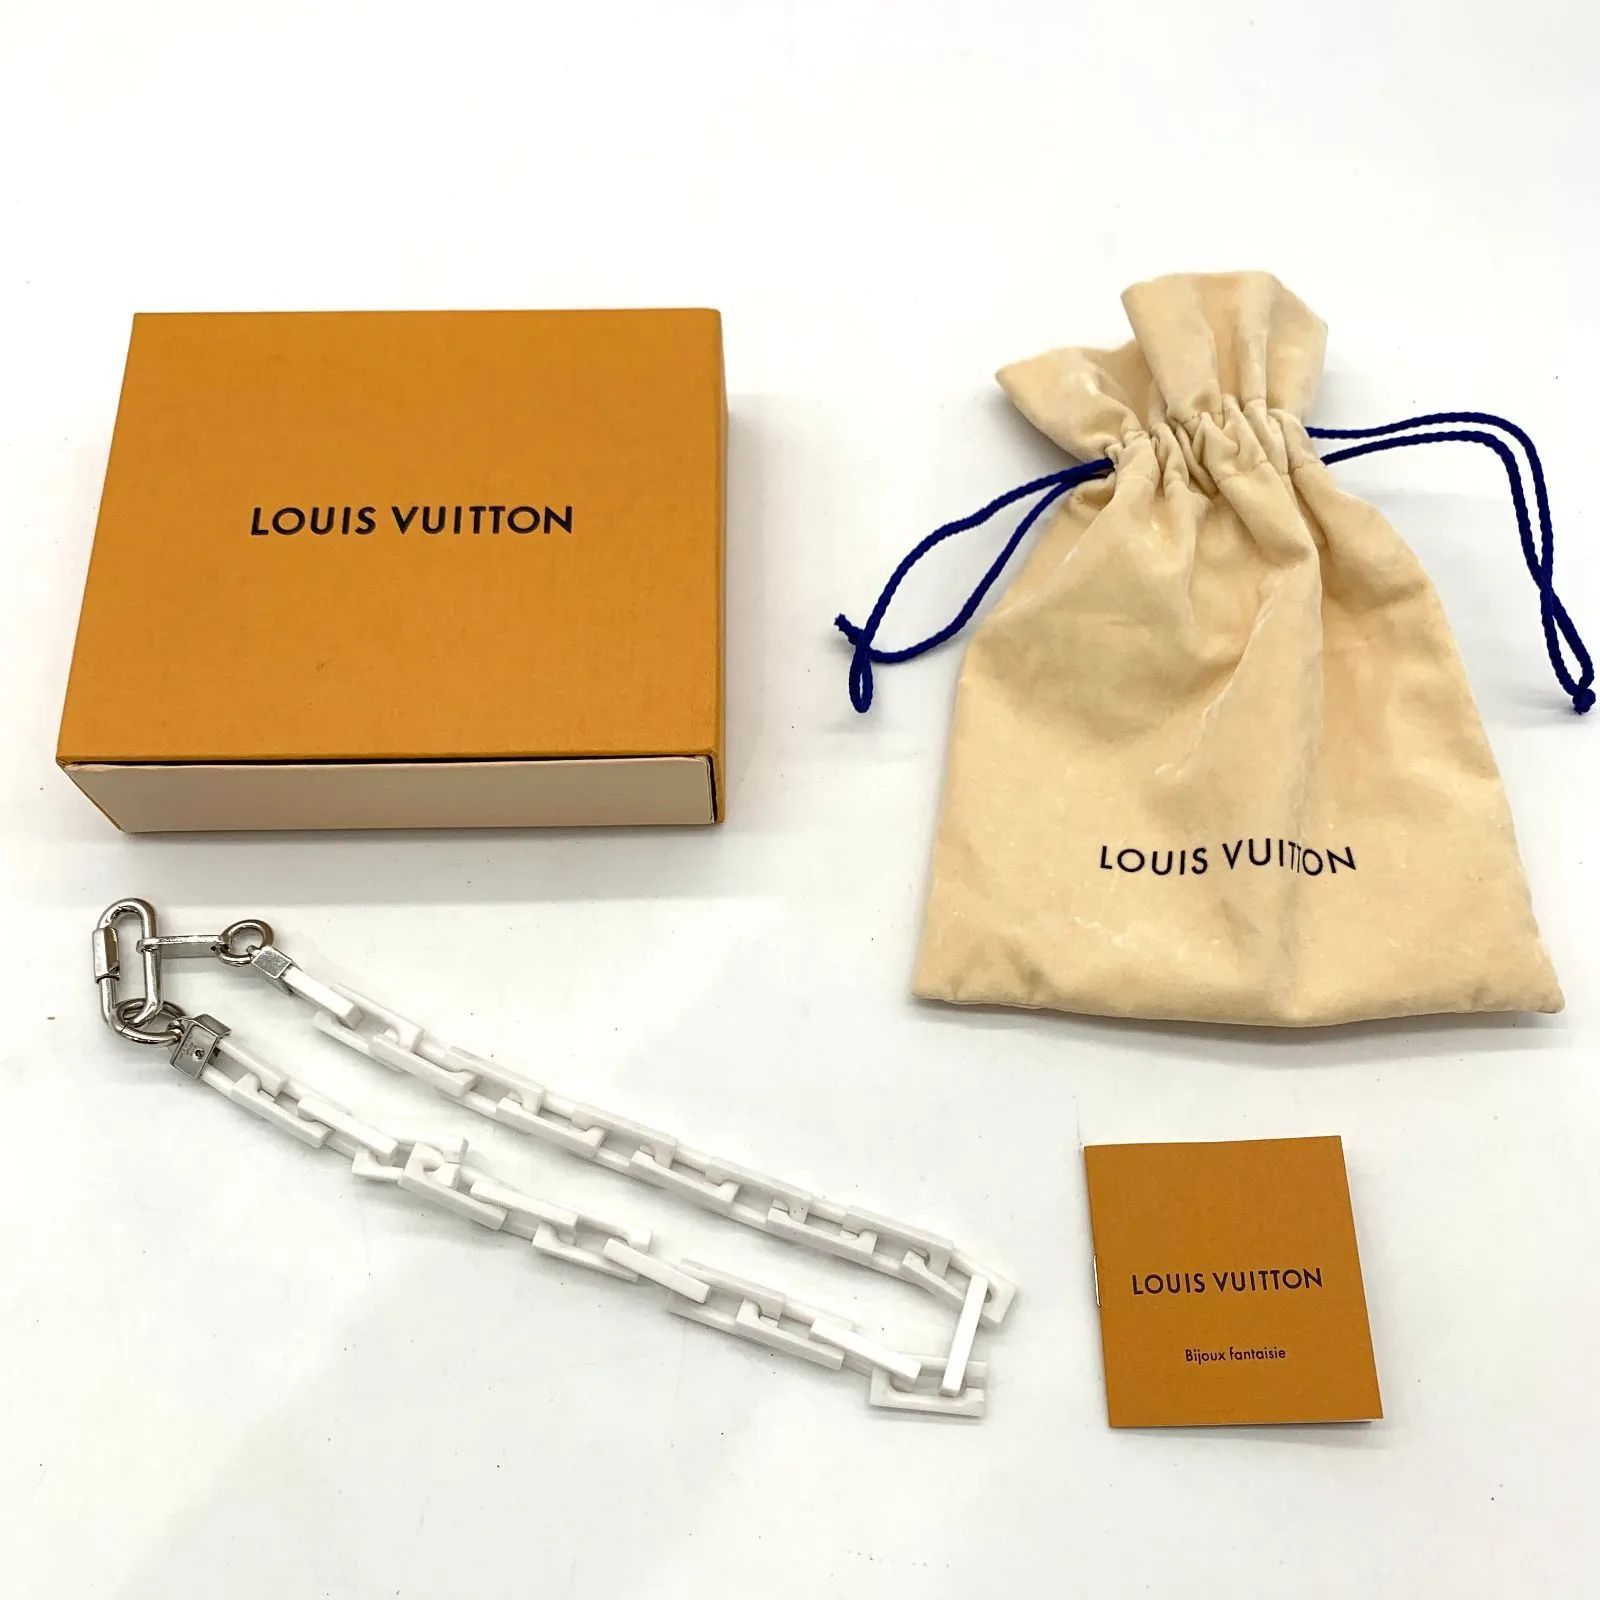 ▽Louis Vuitton ルイヴィトン コリエ スクエア チェーンネックレス